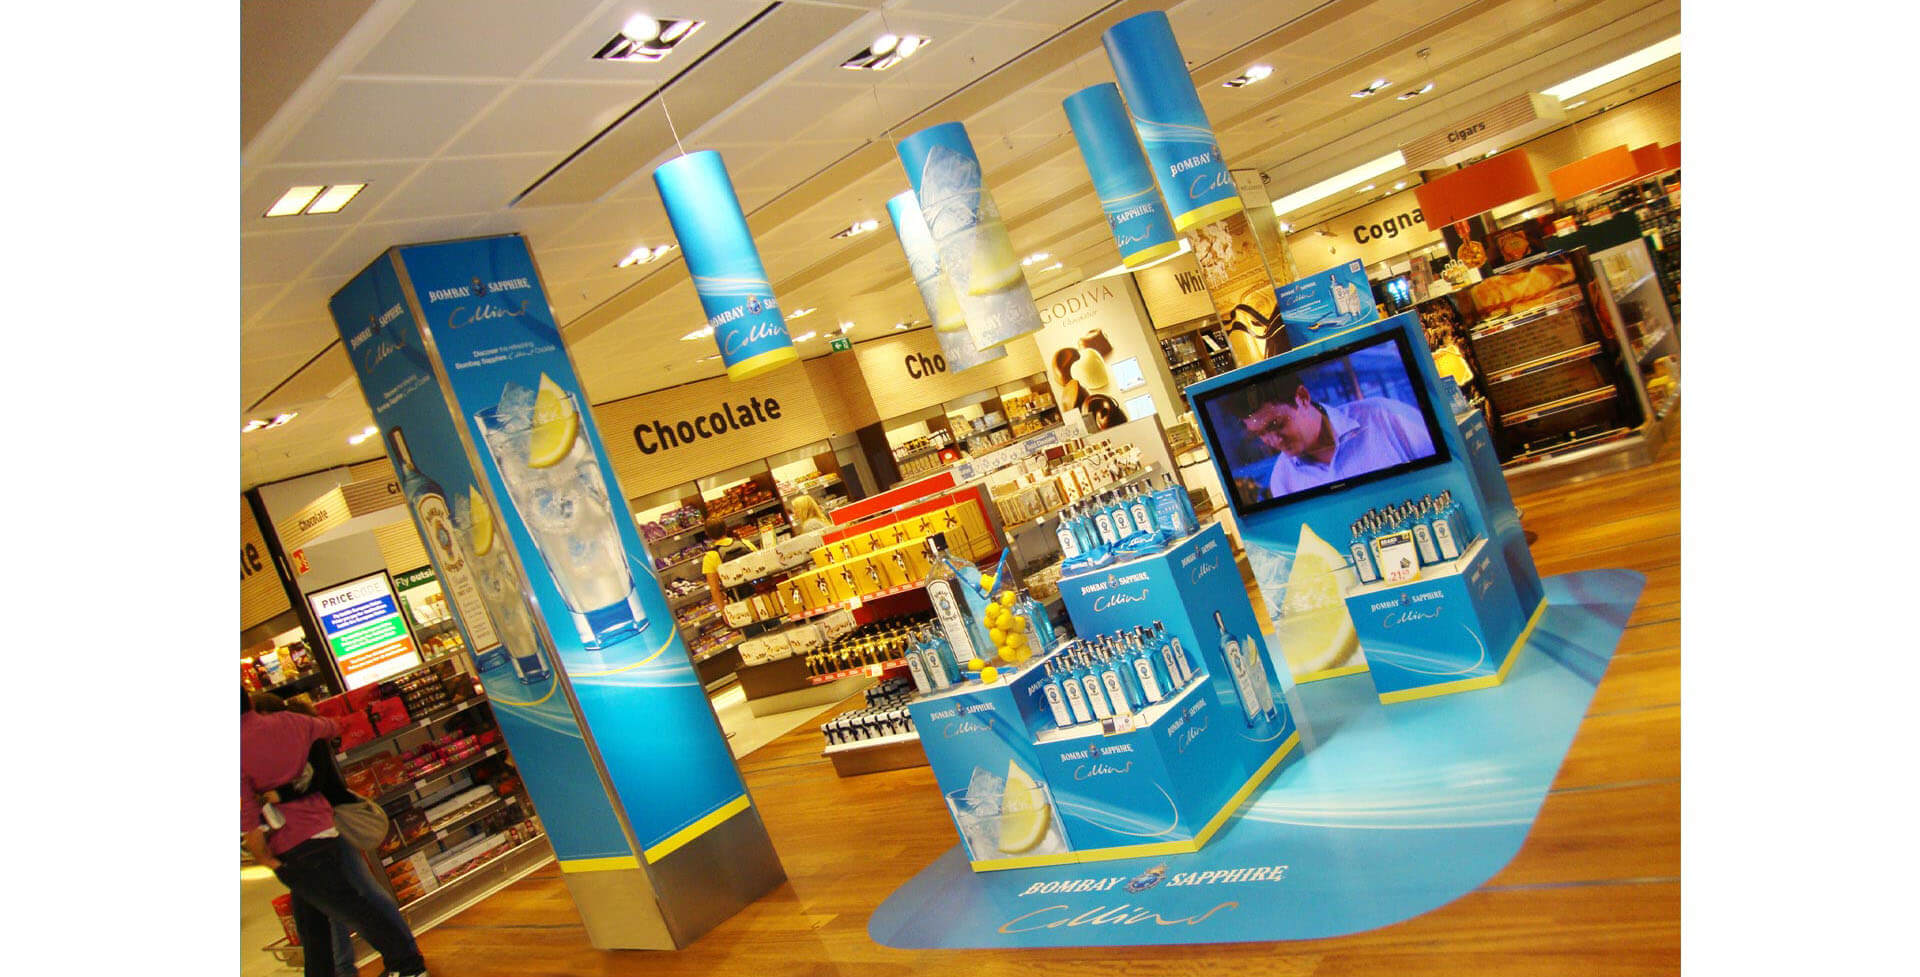 Bombay Sapphire Collins Spirits industry promotion campaigns travel retail design, airports, duty-free airport merchandising and branding